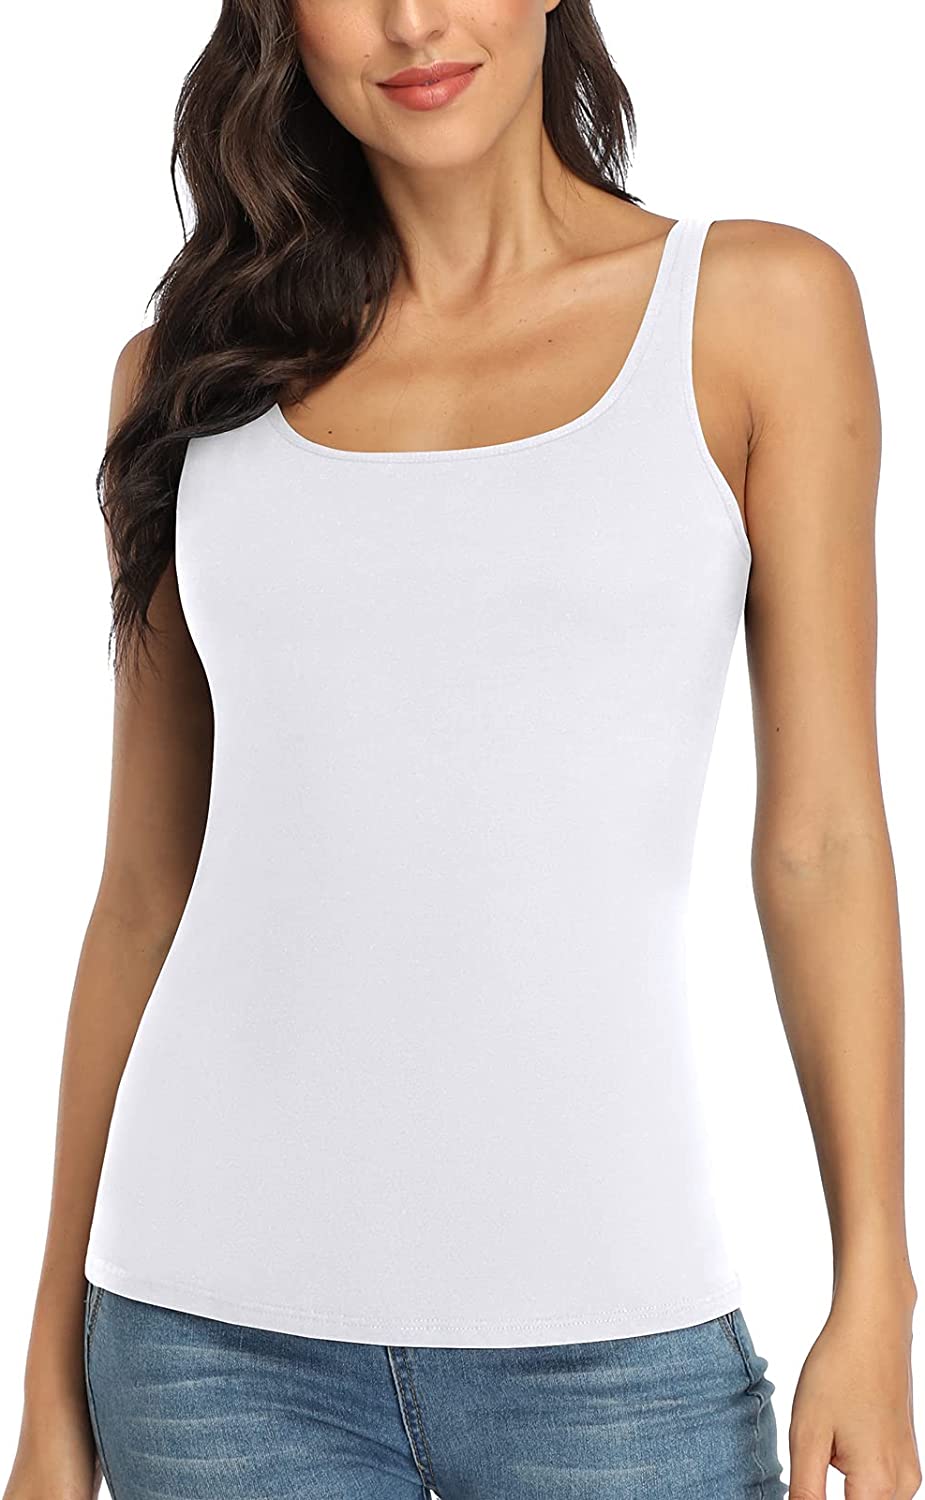 V FOR CITY Women's Cotton Tank Top with Shelf Bra Adjustable Wider Strap  Camisole Basic Cami Tanks